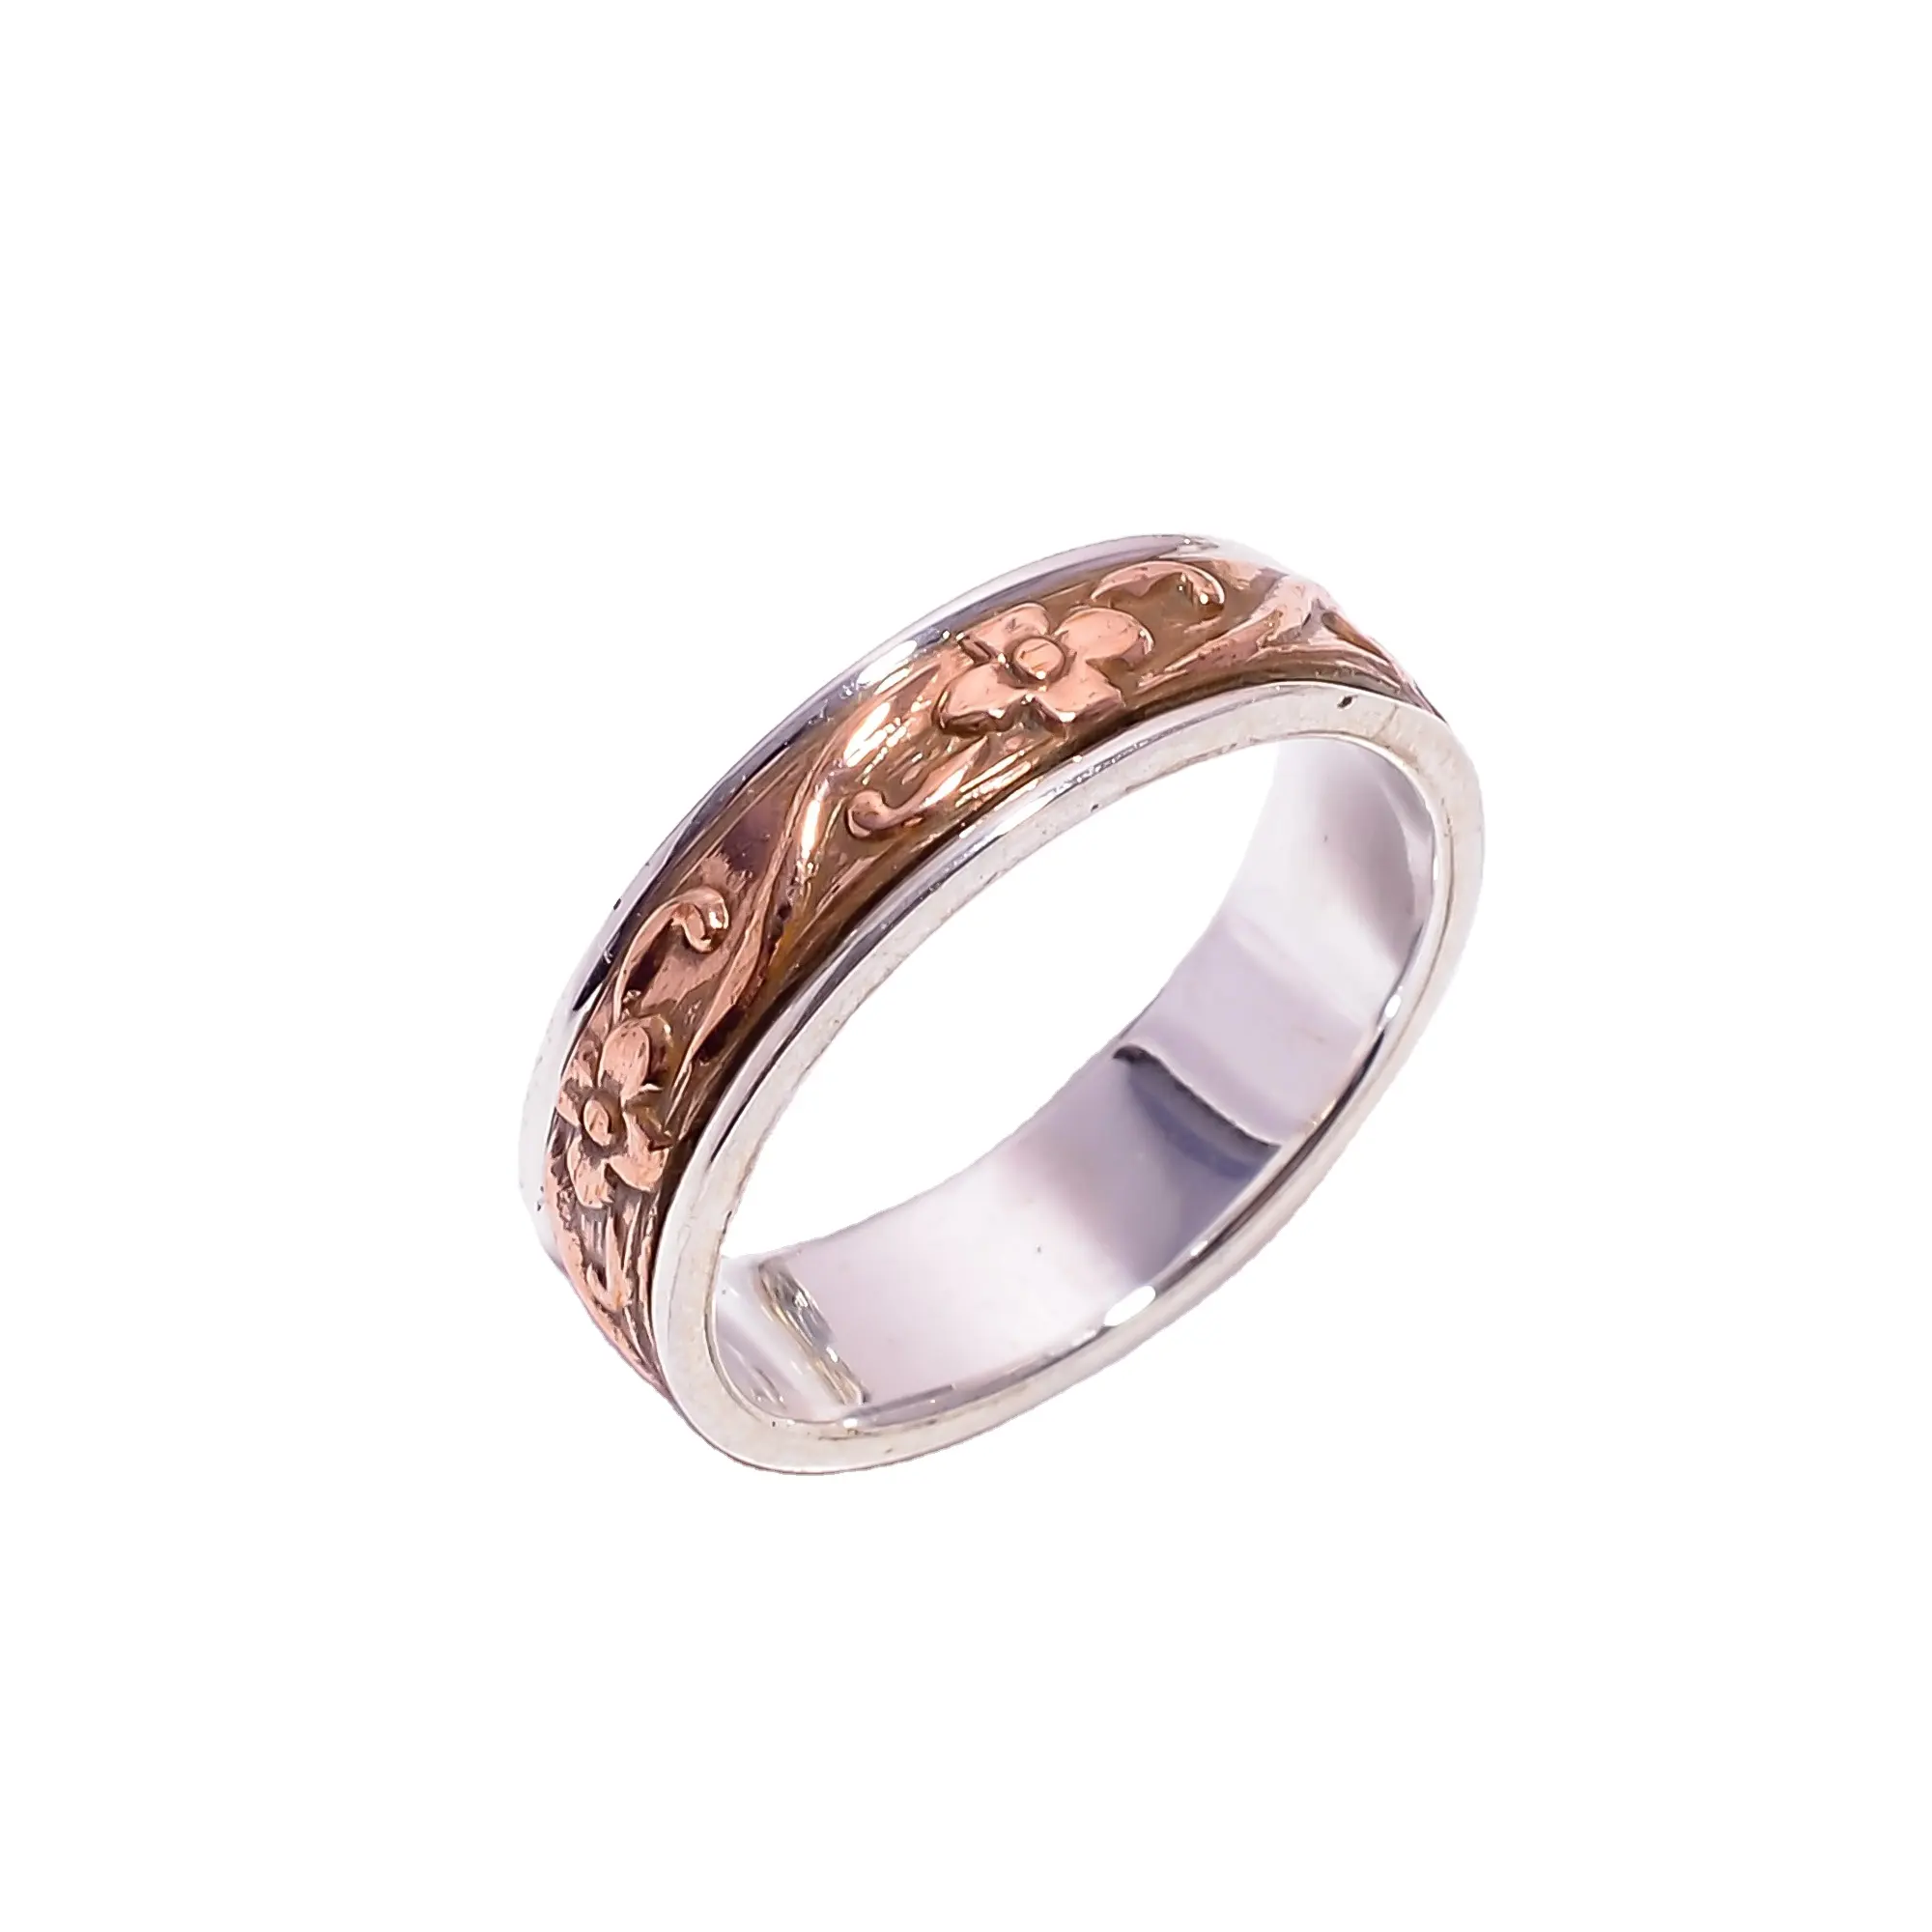 Special Festive Meditation 925 Sterling Silver and Copper Ring Wholesale Flower and Leafs Design Band for Girl